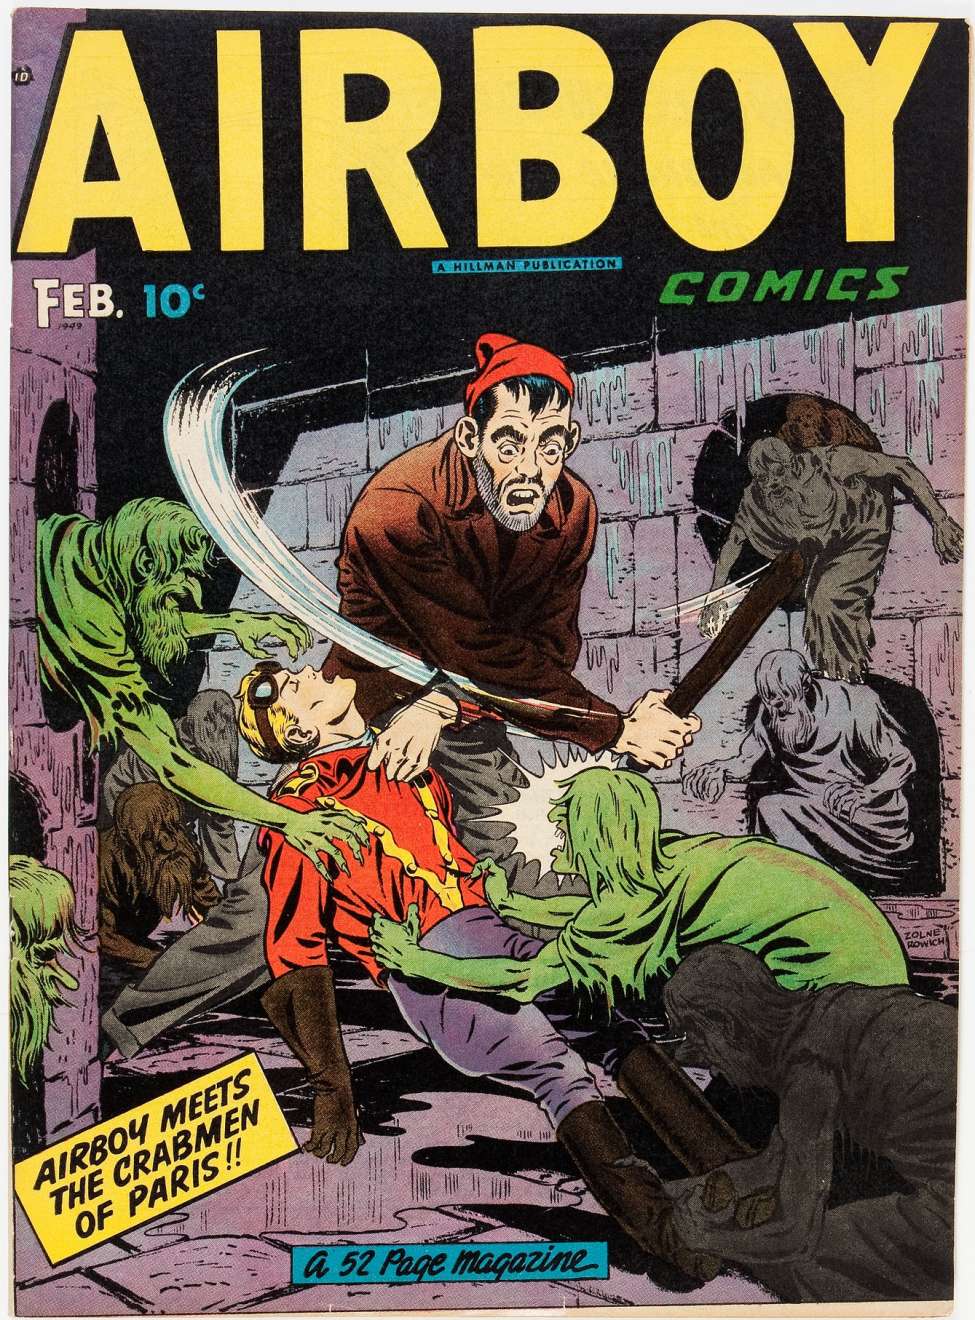 Book Cover For Airboy Comics v6 1